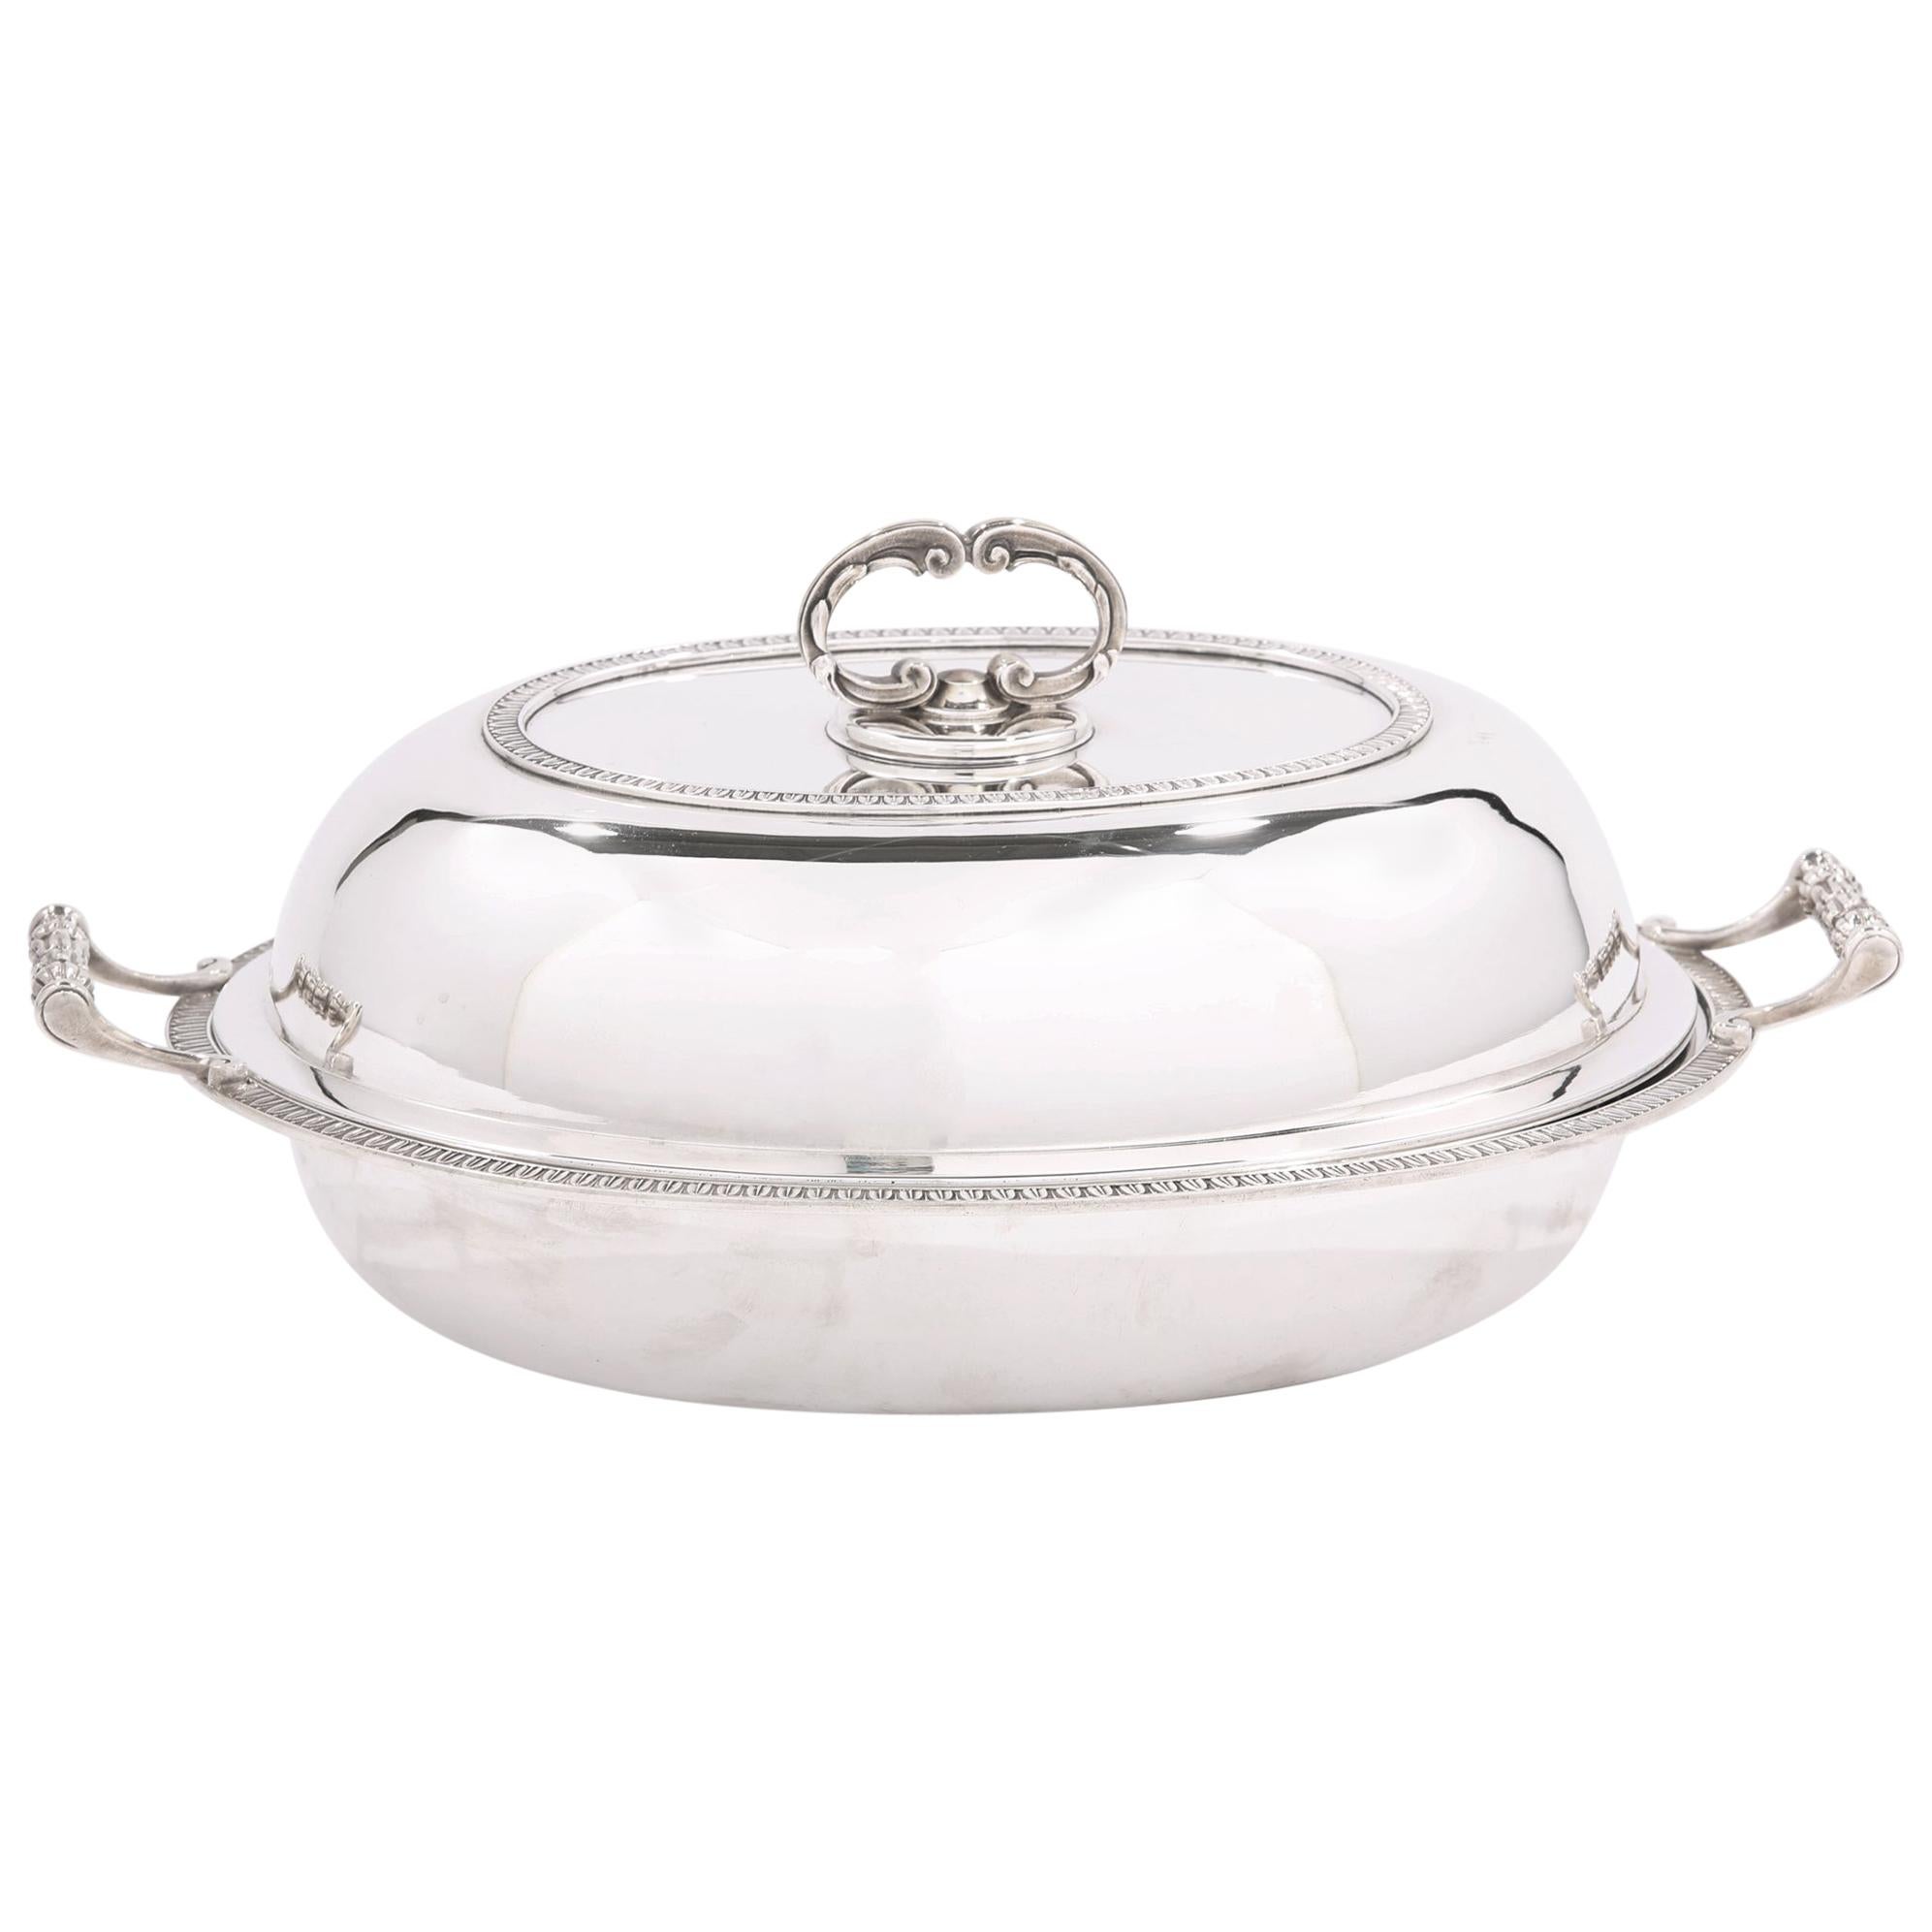 Cartier Sterling Silver Tableware Covered Dish